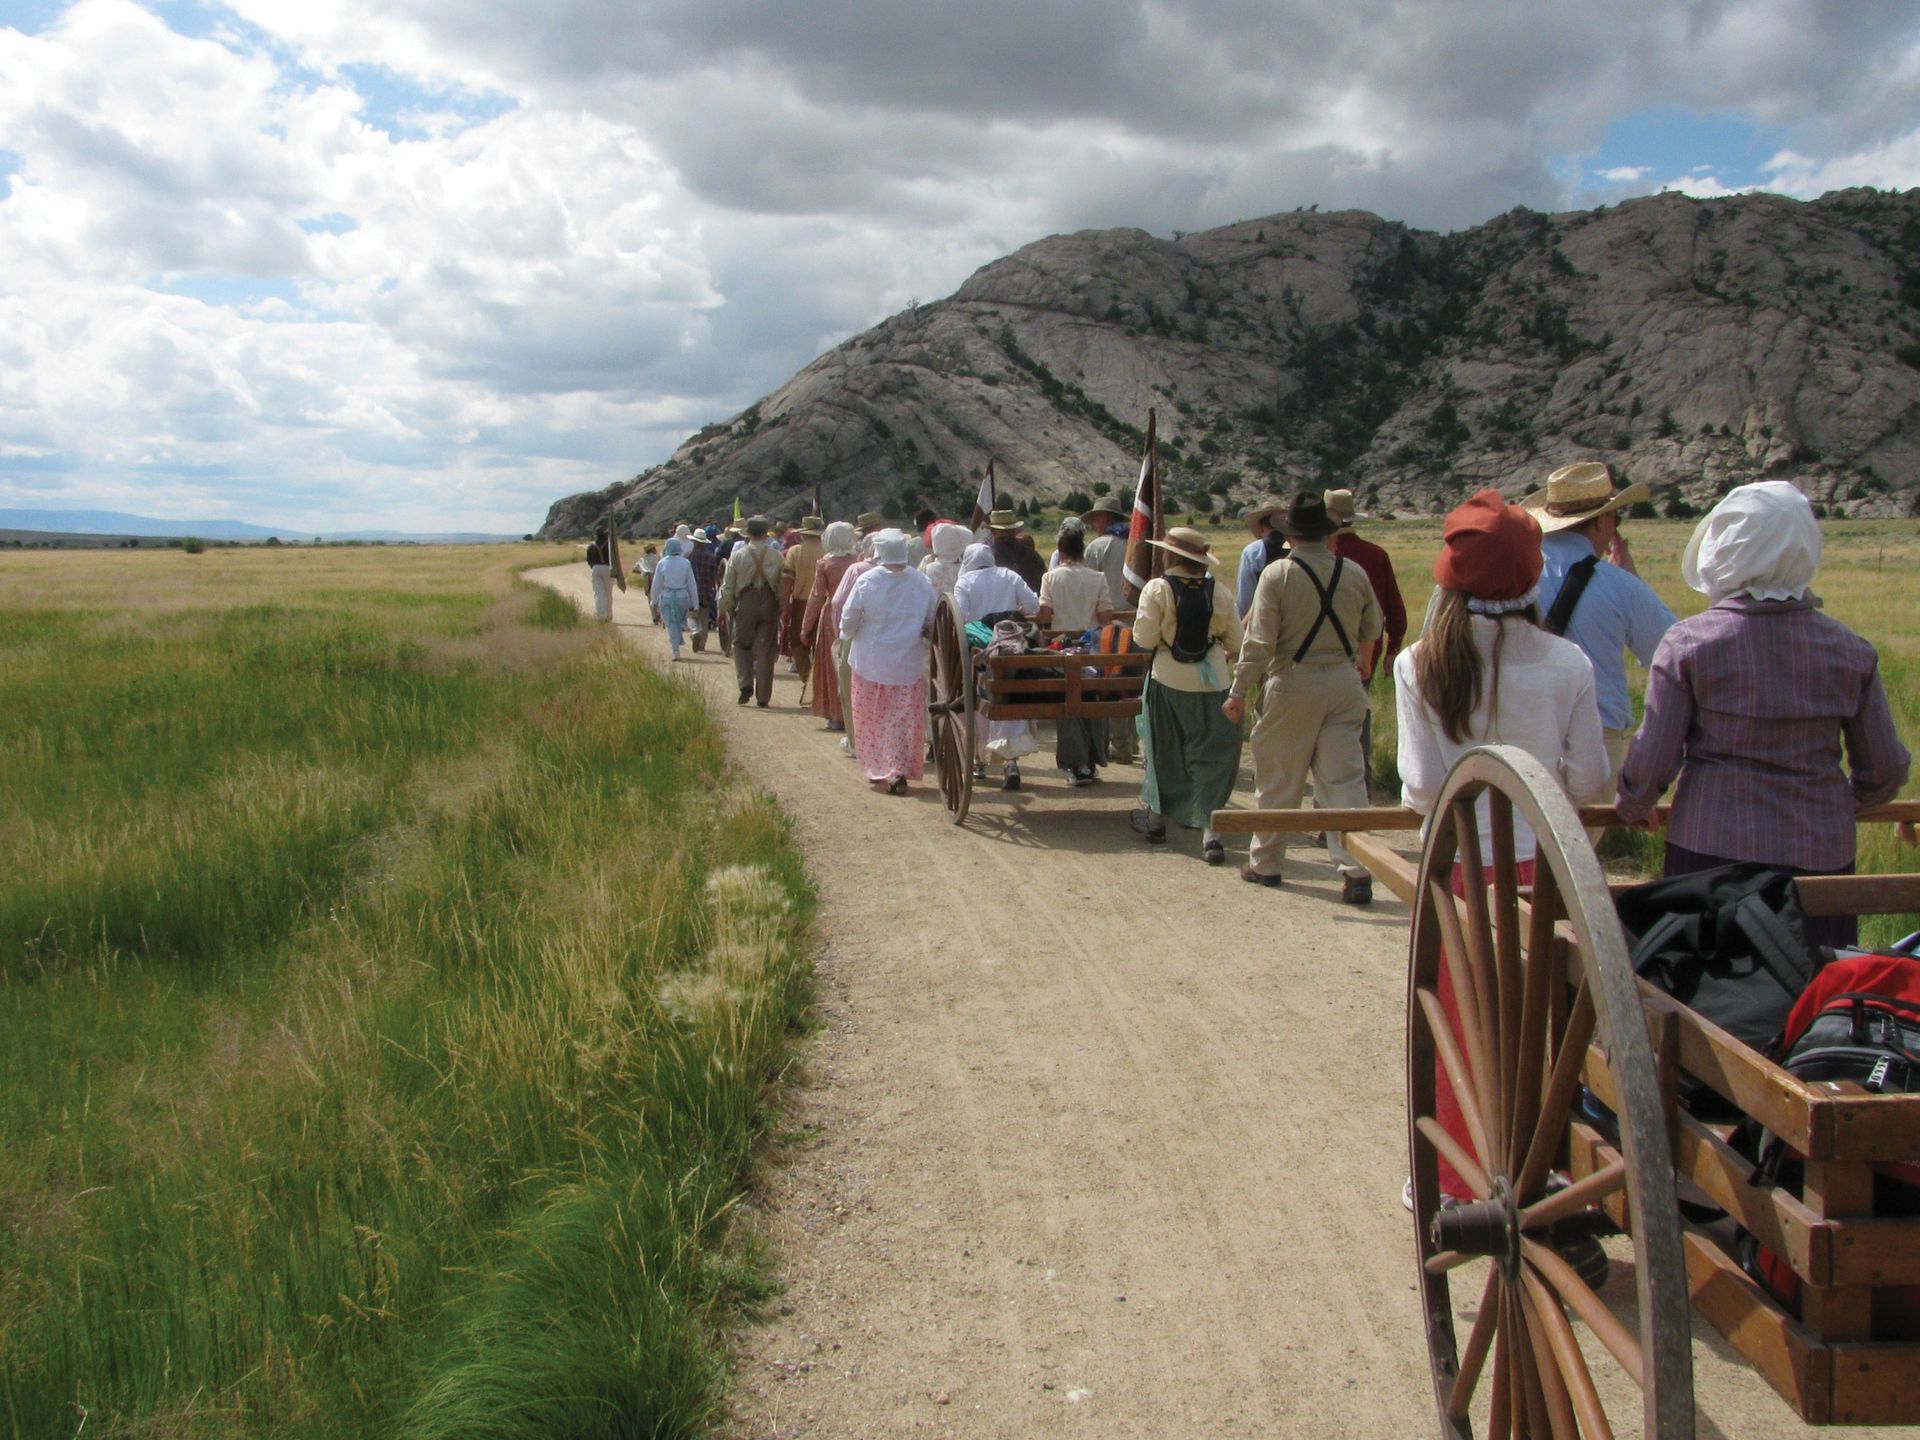 A large group of people walk down a road past a mountain, all pushing and pulling handcarts.